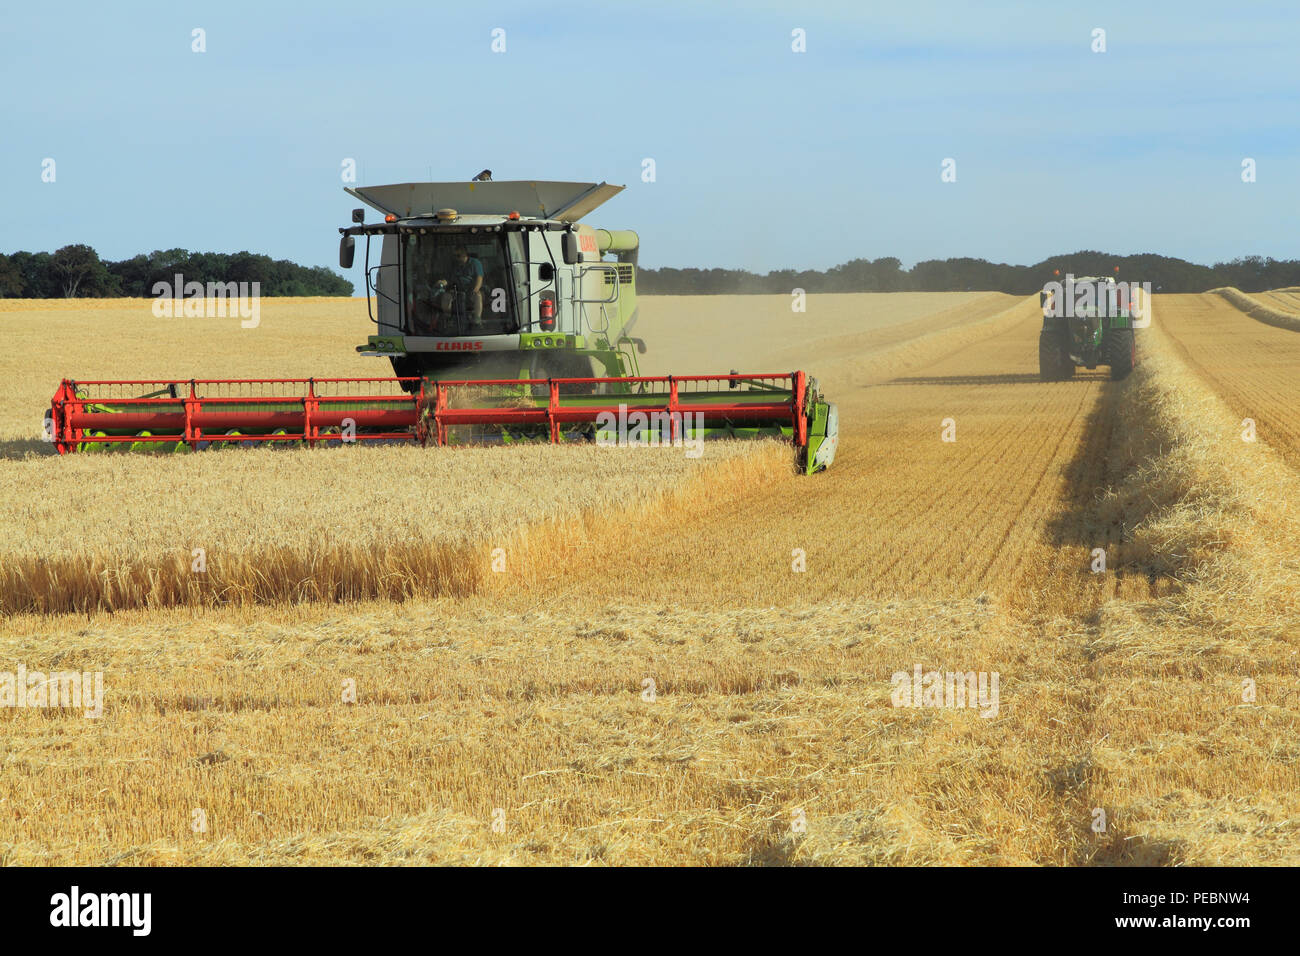 Barley, field, harvest, harvester, machine, combine, Claas Lexion 760, agriculture, crop, corn, harvesting Stock Photo